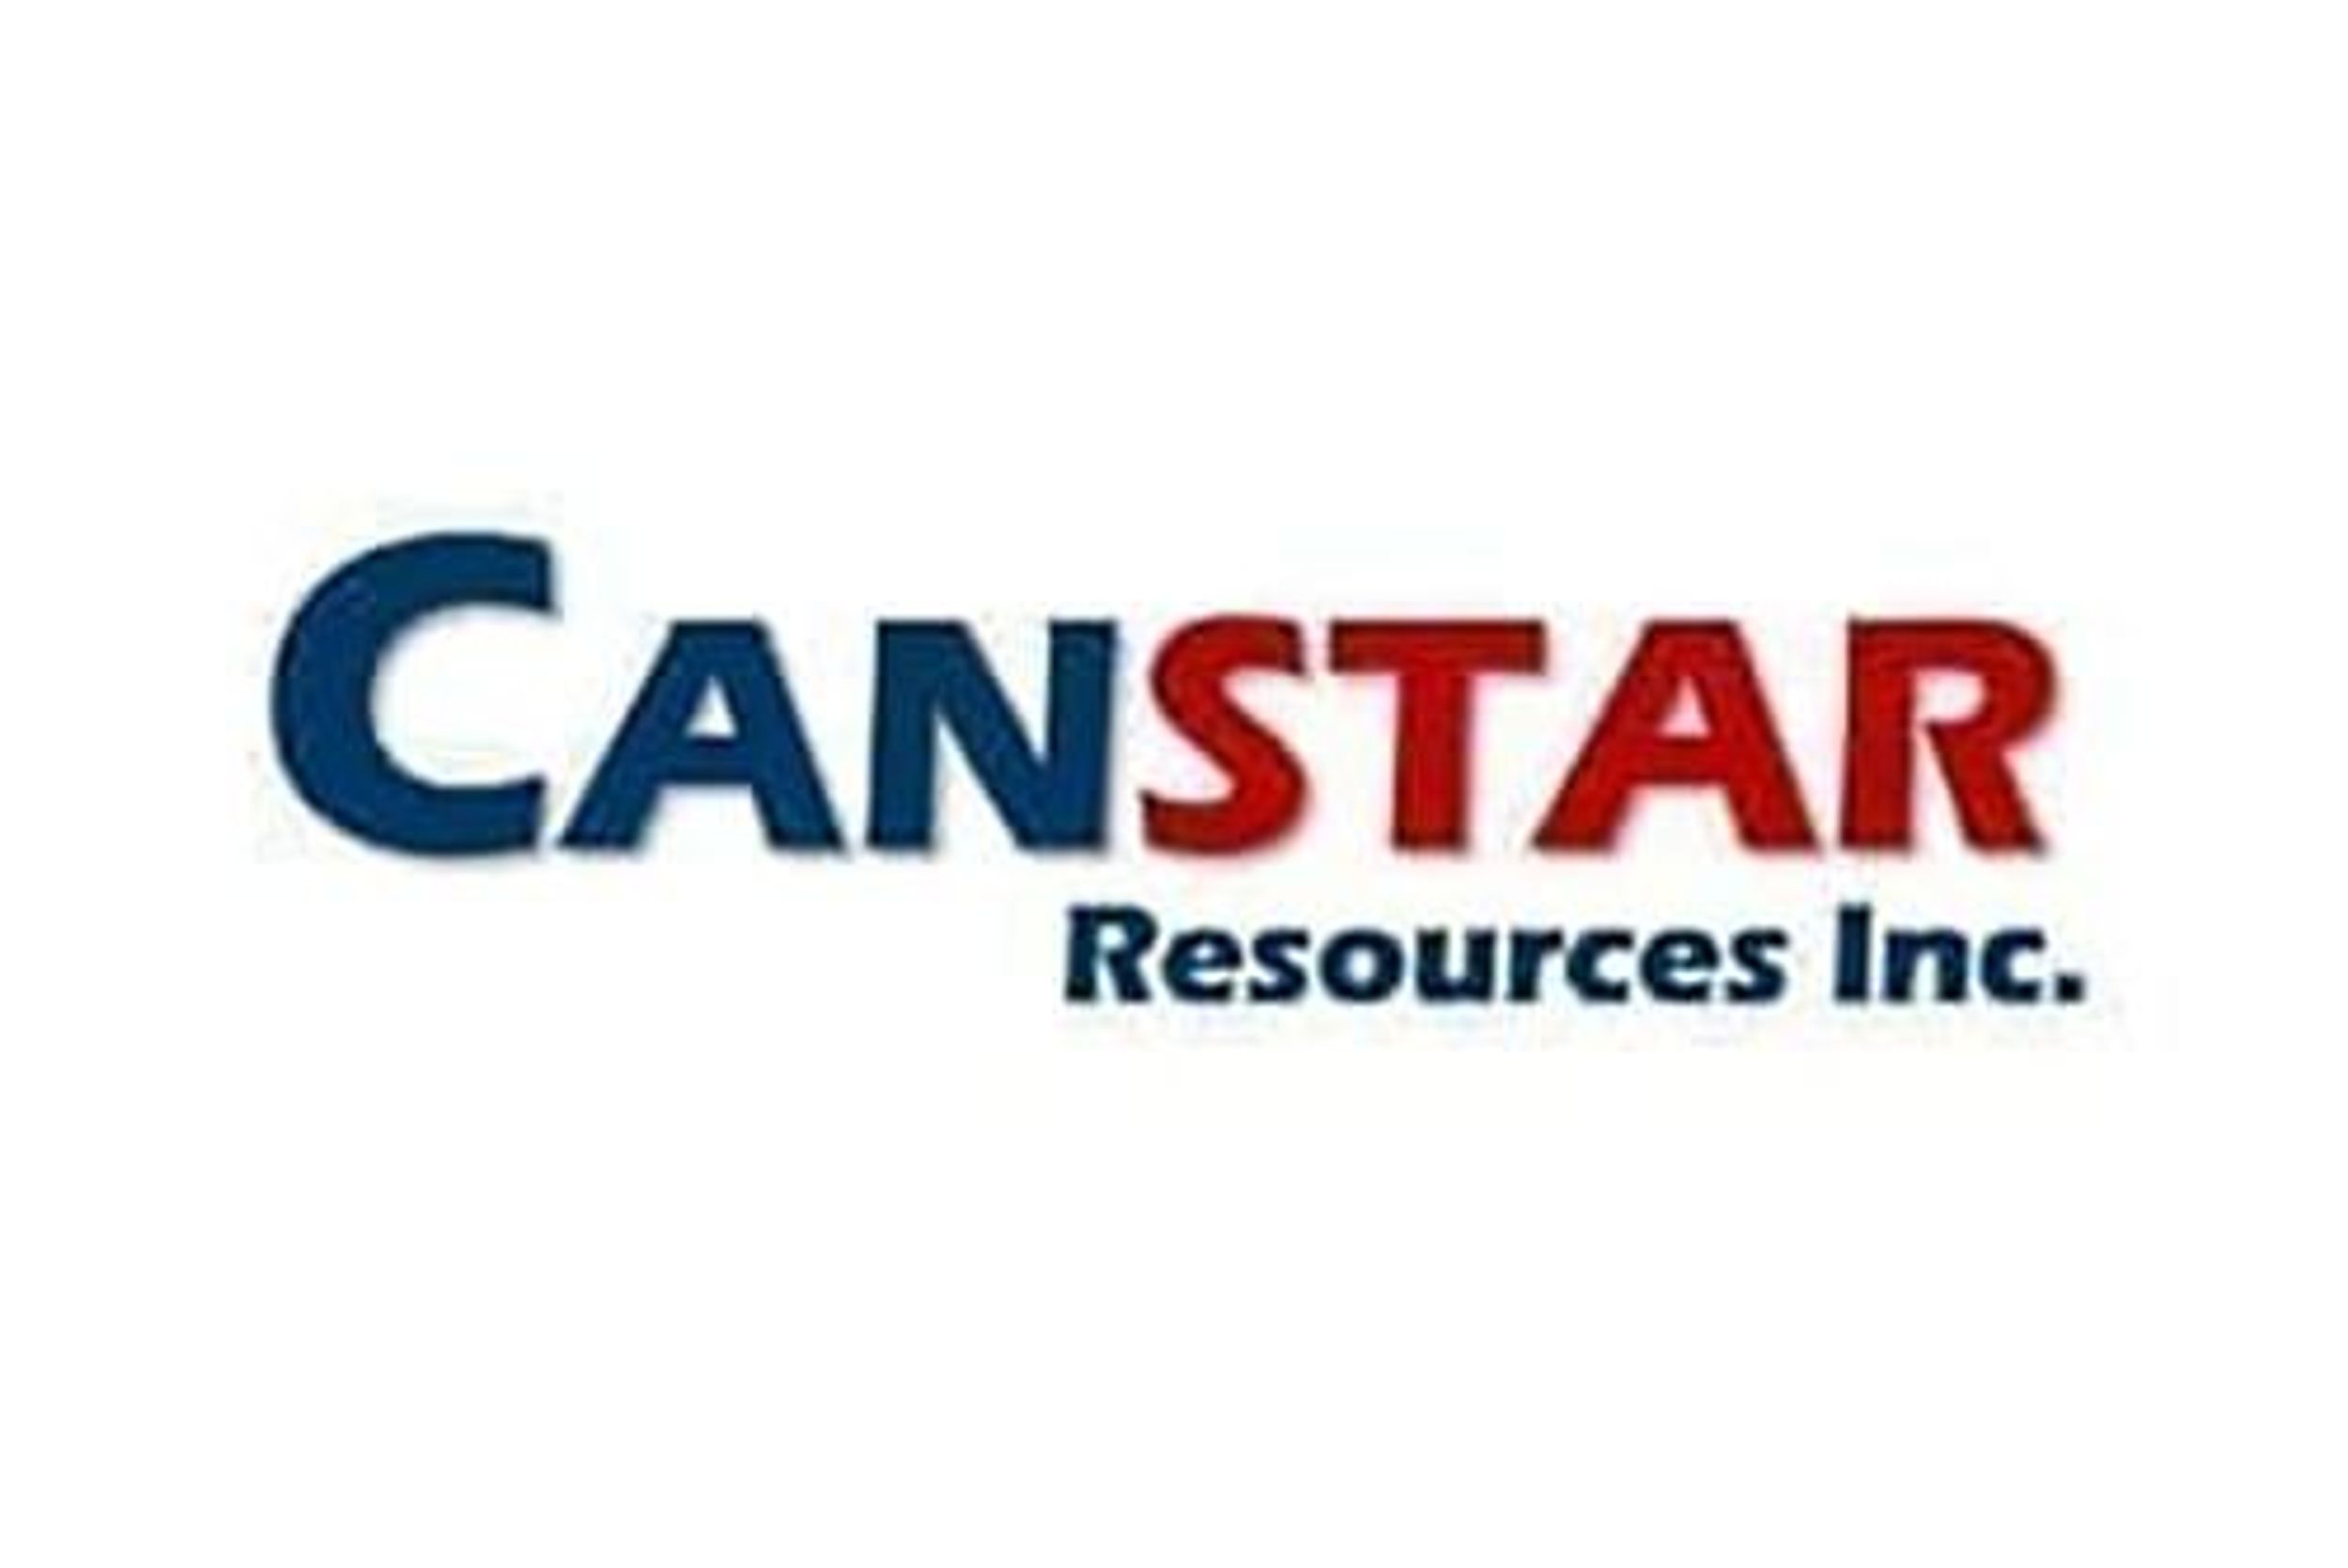 Canstar Acquires the Hermitage Property, Expanding its Newfoundland Gold Exploration Project Claims to 774 km2